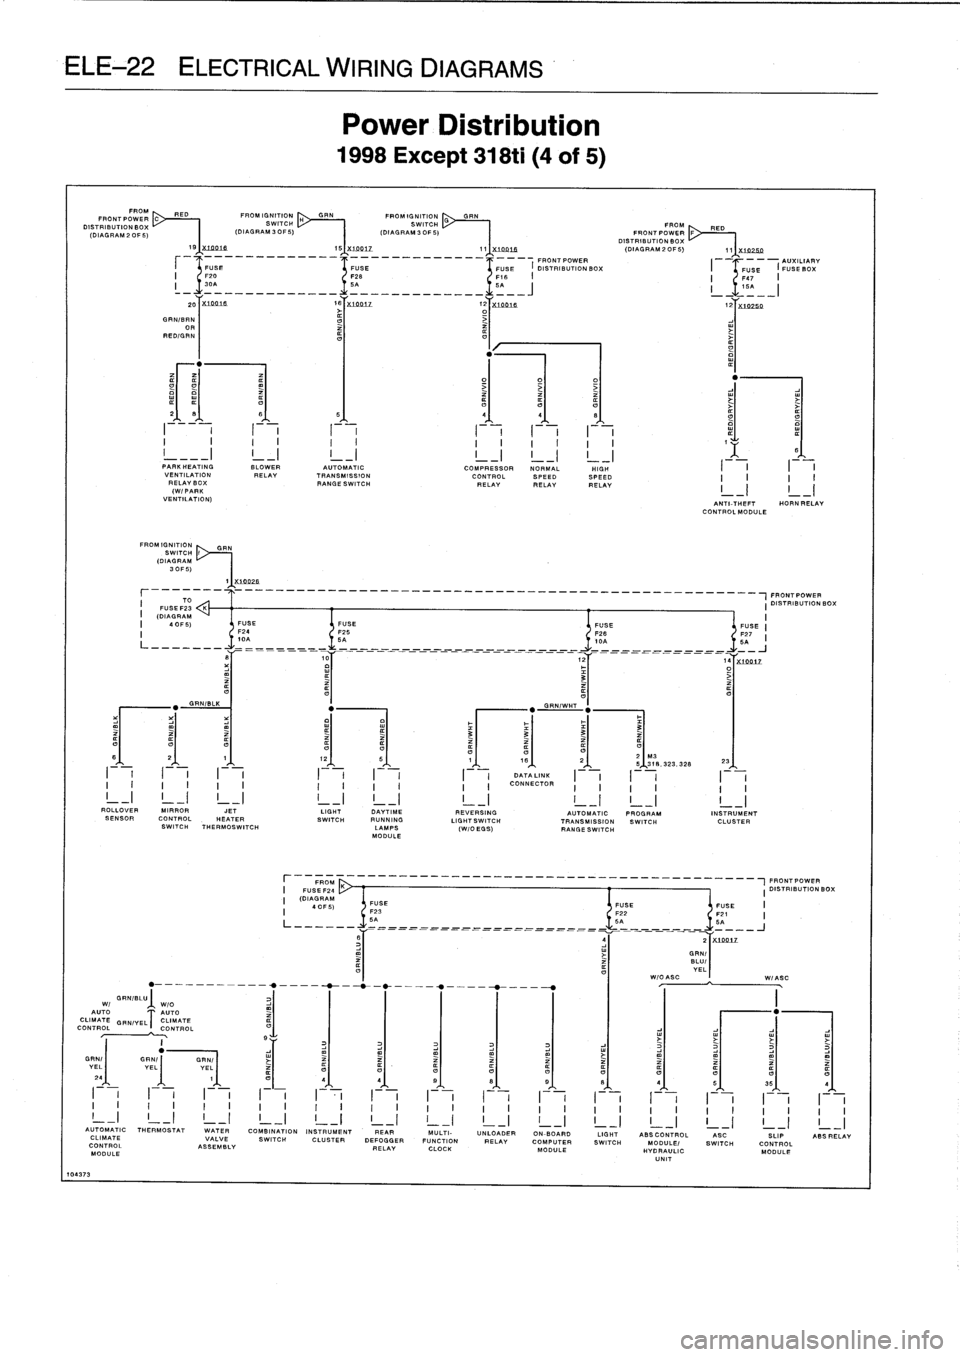 BMW 328i 1997 E36 Service Manual 
ELE-22

ELECTRICAL
WIRING
DIAGRAMS

GRNIBLU
Wl

WIO

AUTO

AUTO

CLIMATE

GEN/YELT
CLIMATE

CONTROL

CONTROL

10437
3

FP

OM~
	

PED
FRONTPOWER
DISTRIBUTION

BOY%

(DIAGRAM

2
OF
5)

S

FROMIGNITION